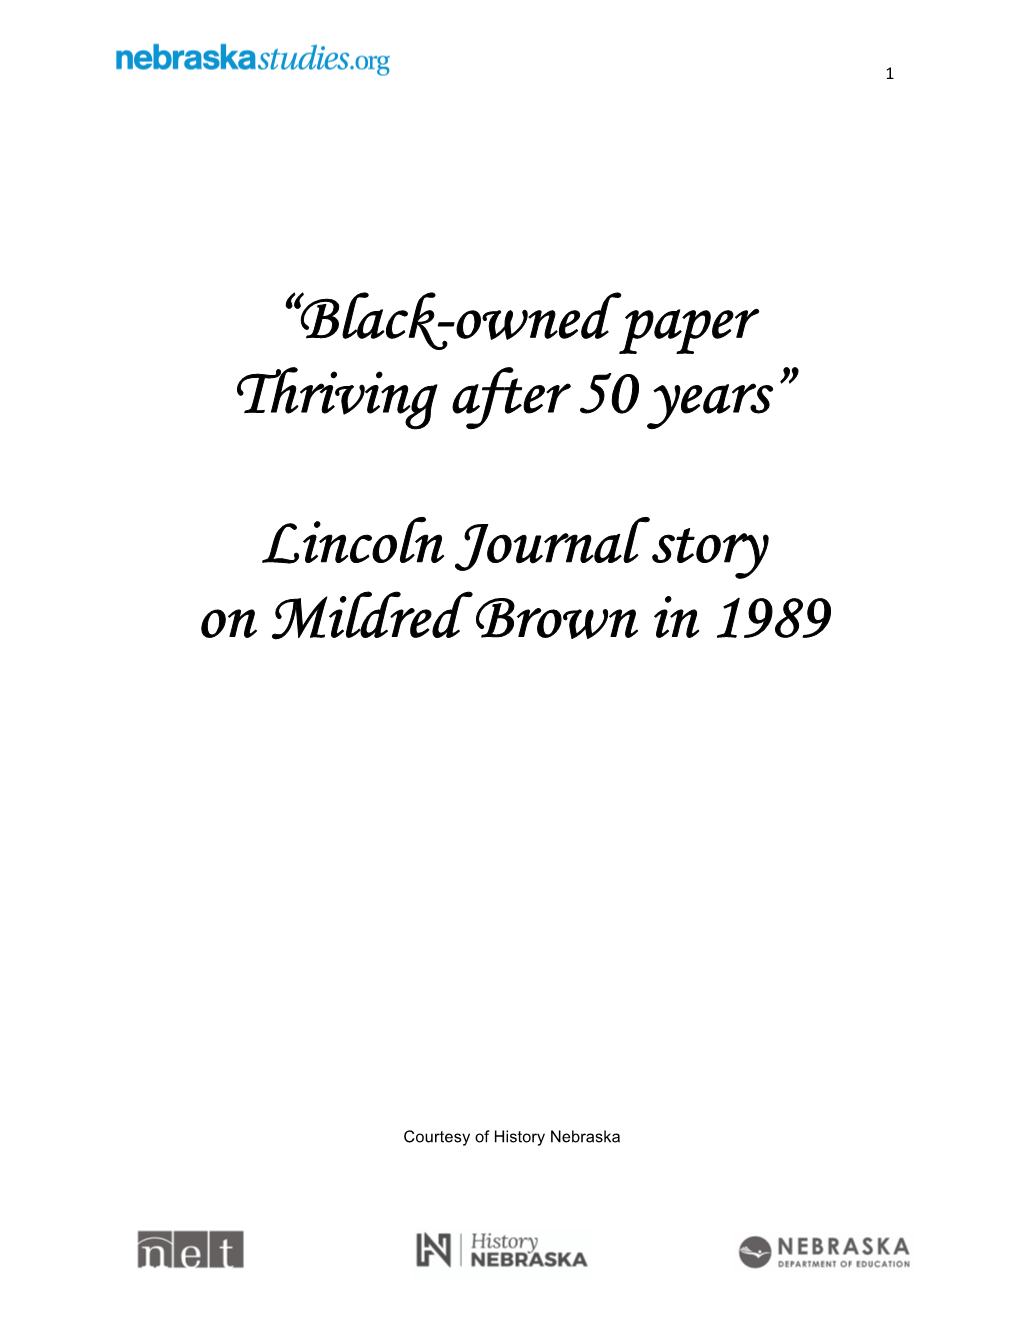 Lincoln Journal Story on Mildred Brown in 1989